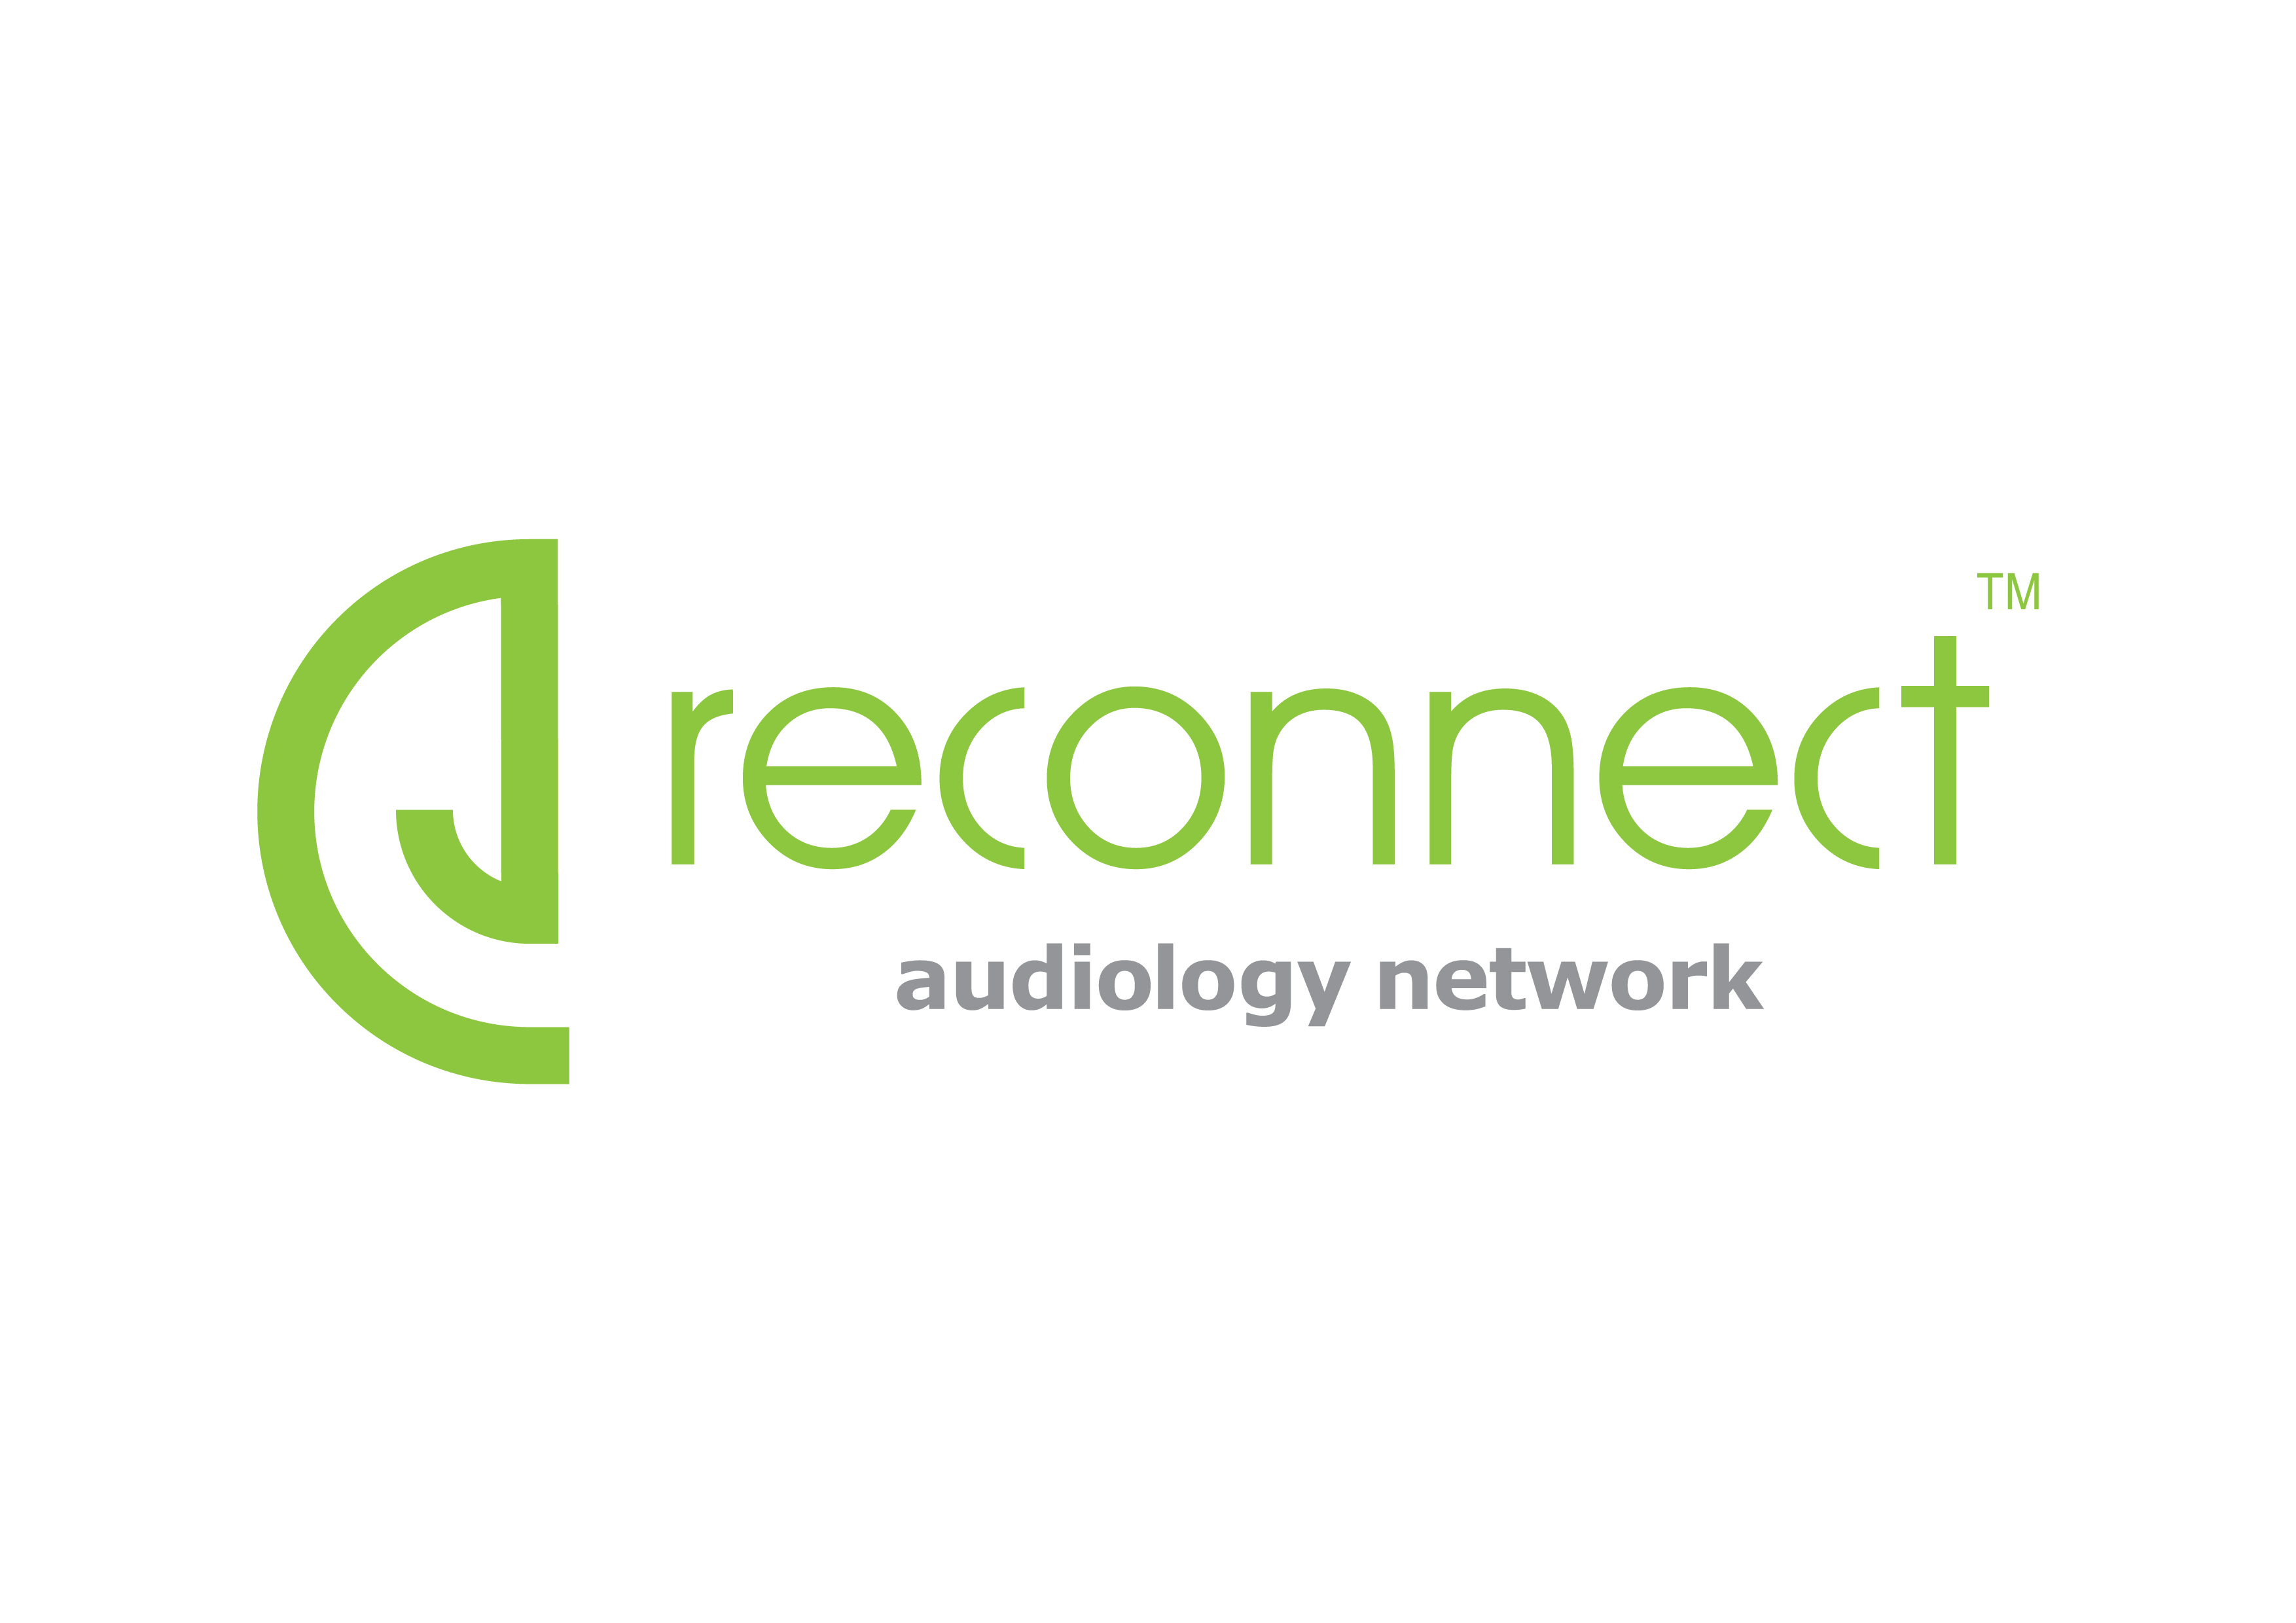 Reconnect logon and link to website